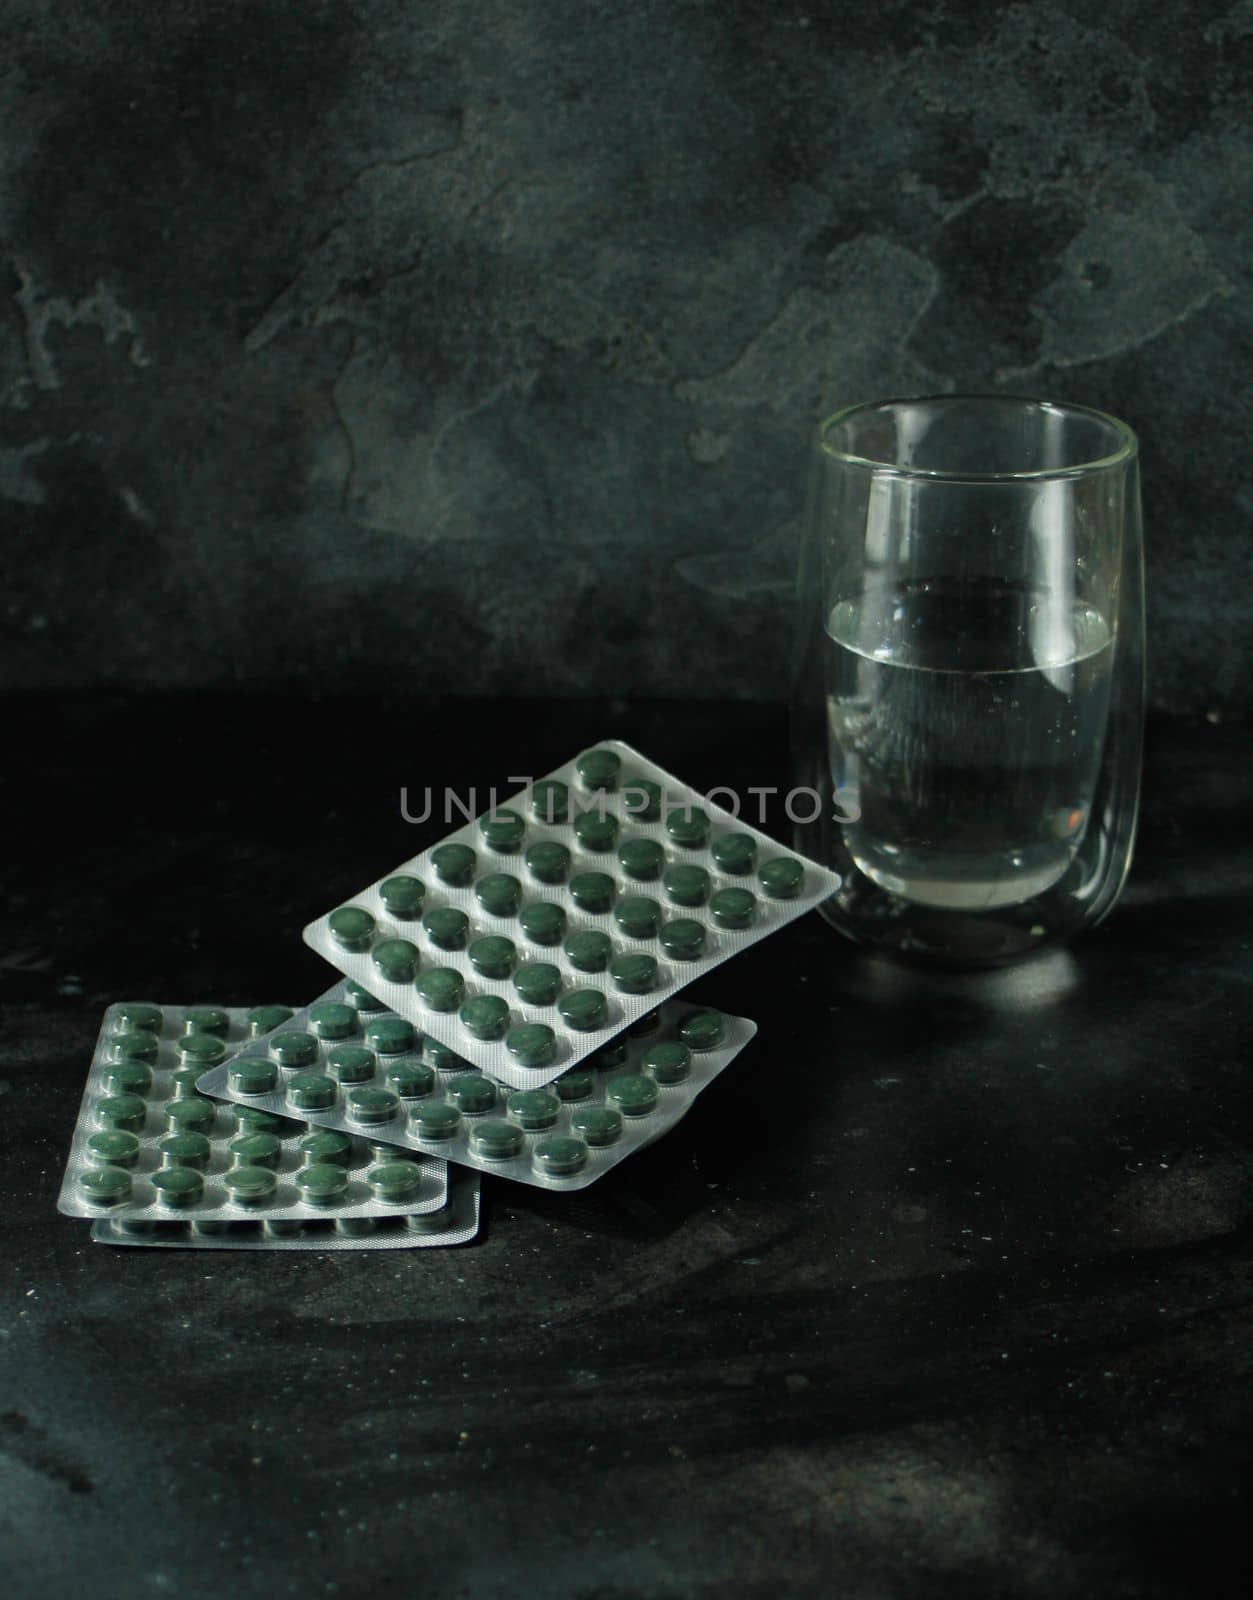 Chlorella or spirulina tablets and a glass of water on dark background by danjelaruci